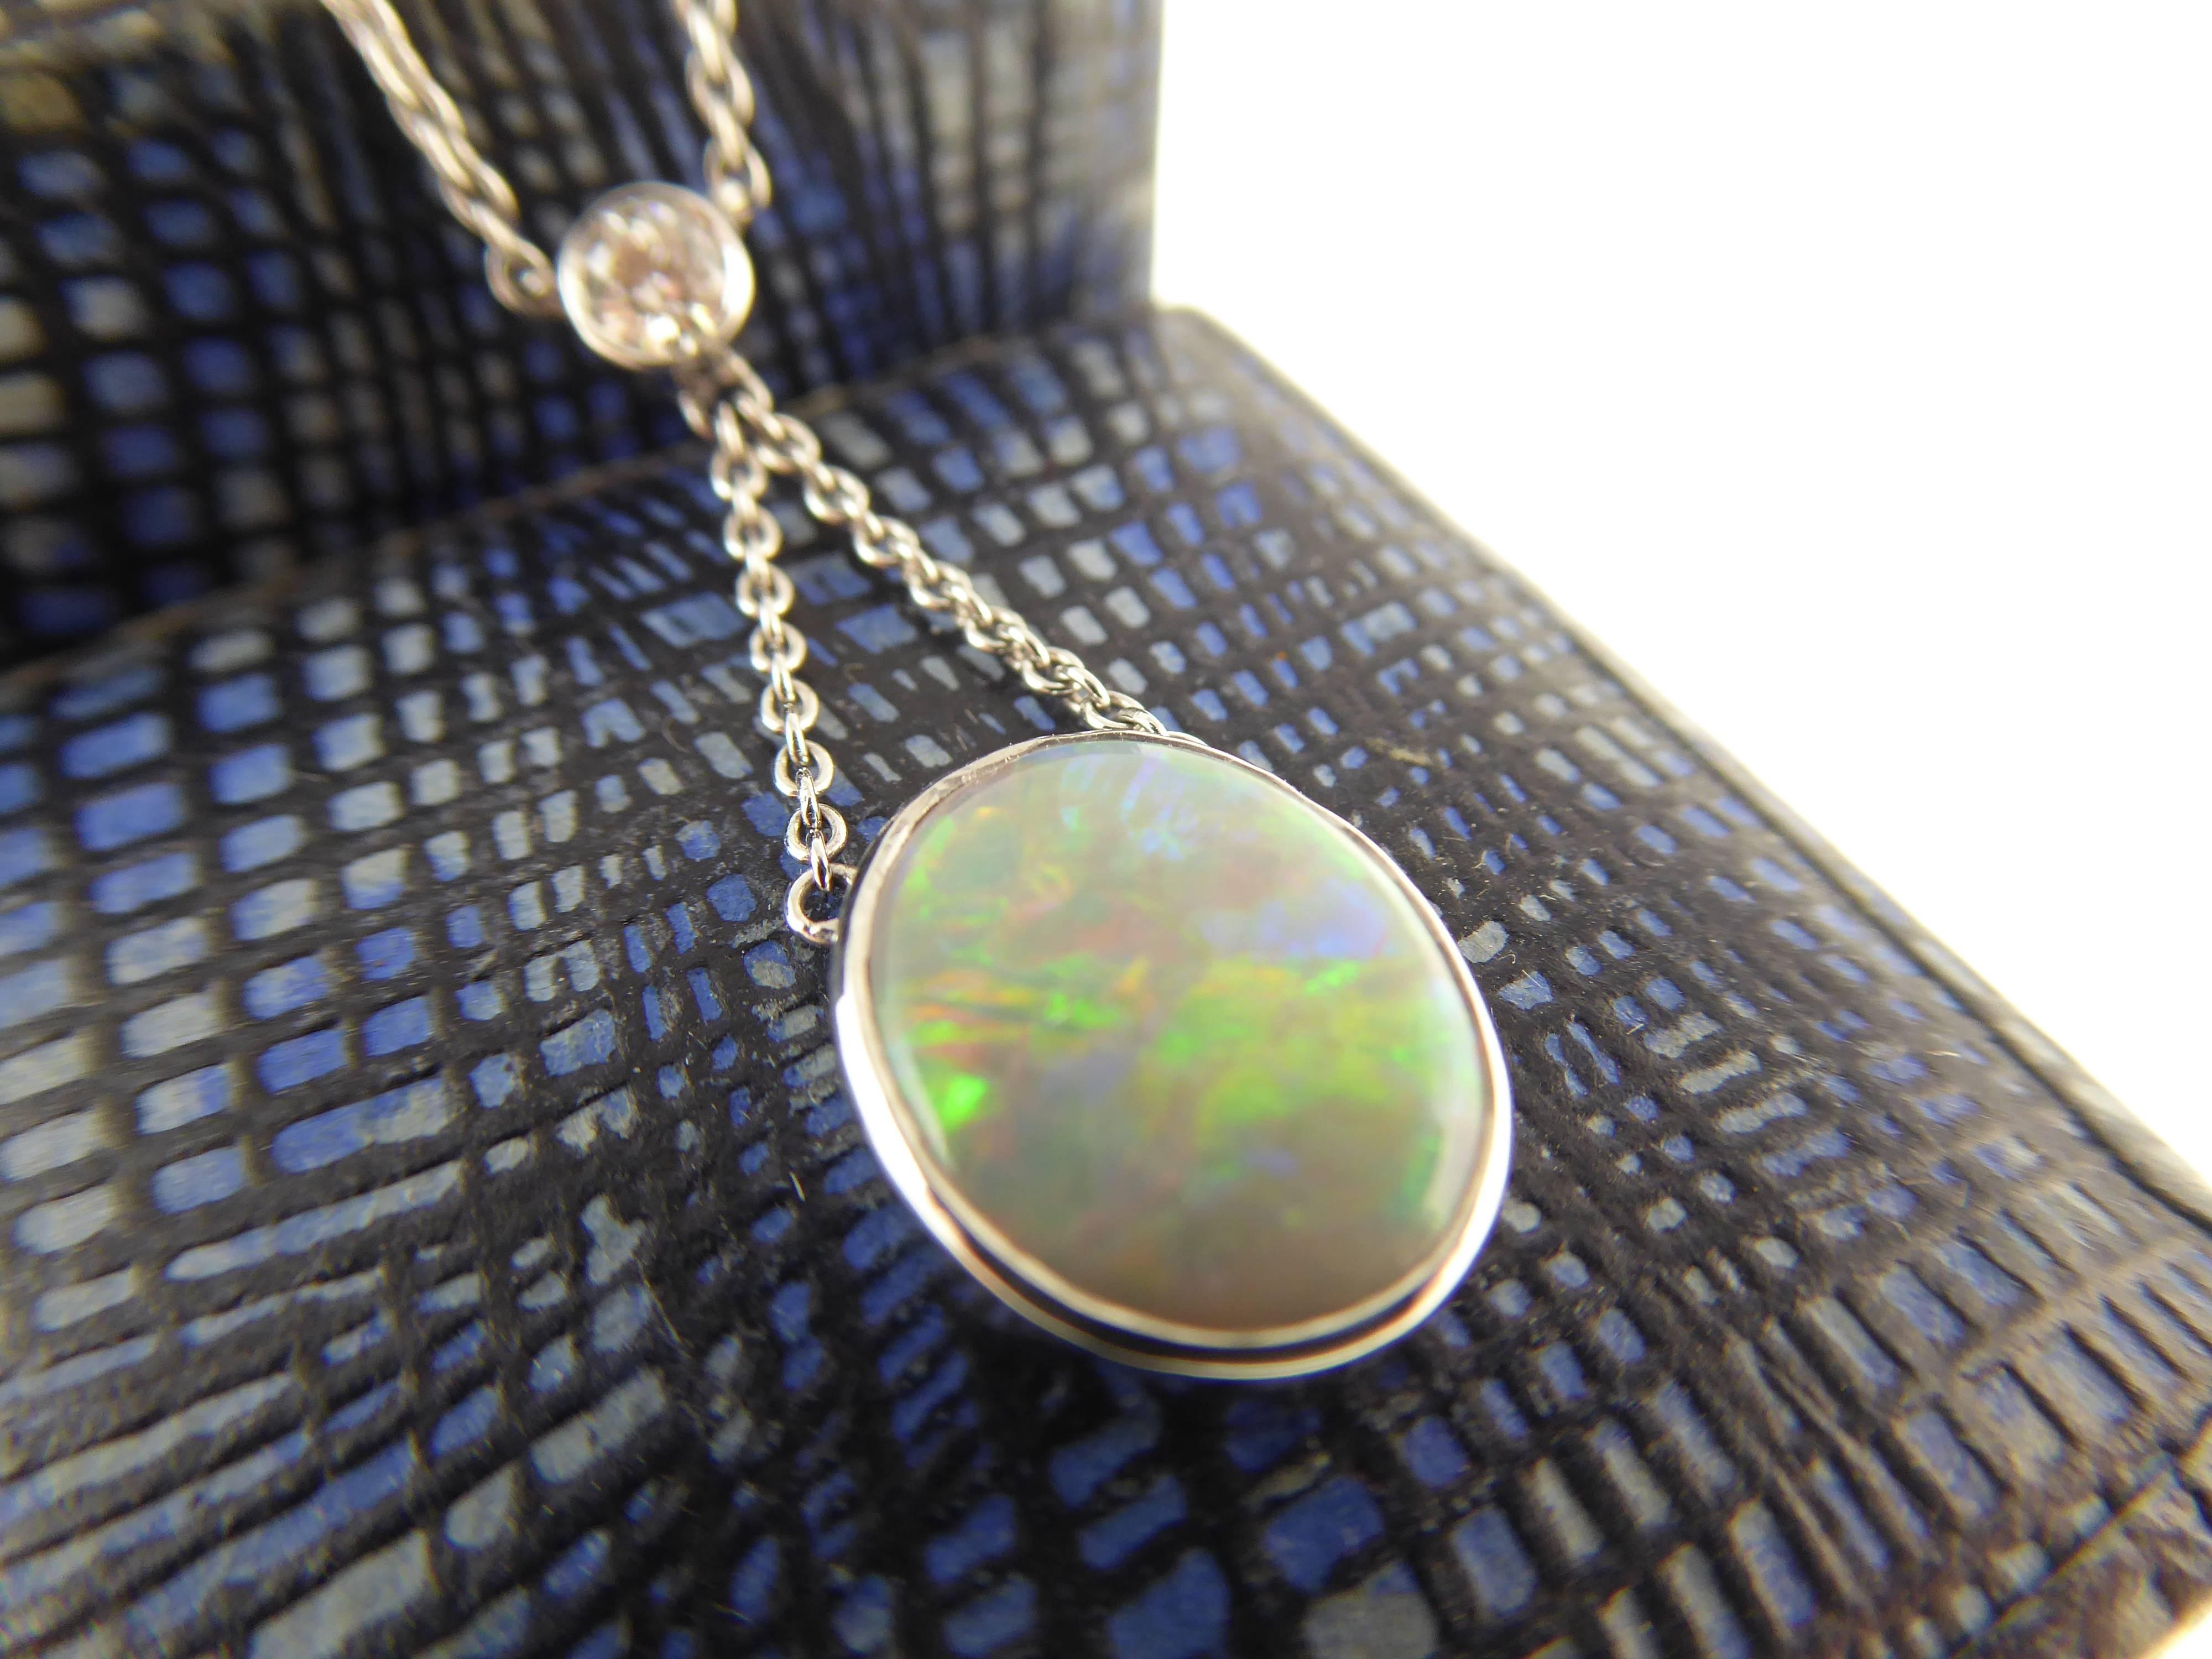 An elegant and refined Edwardian style opal and diamond pendant.  The oval cabochon cut opal displays a beautiful play of red/blue/green fire and is suspended by fine white gold chain from a brilliant cut diamond in a white rub over